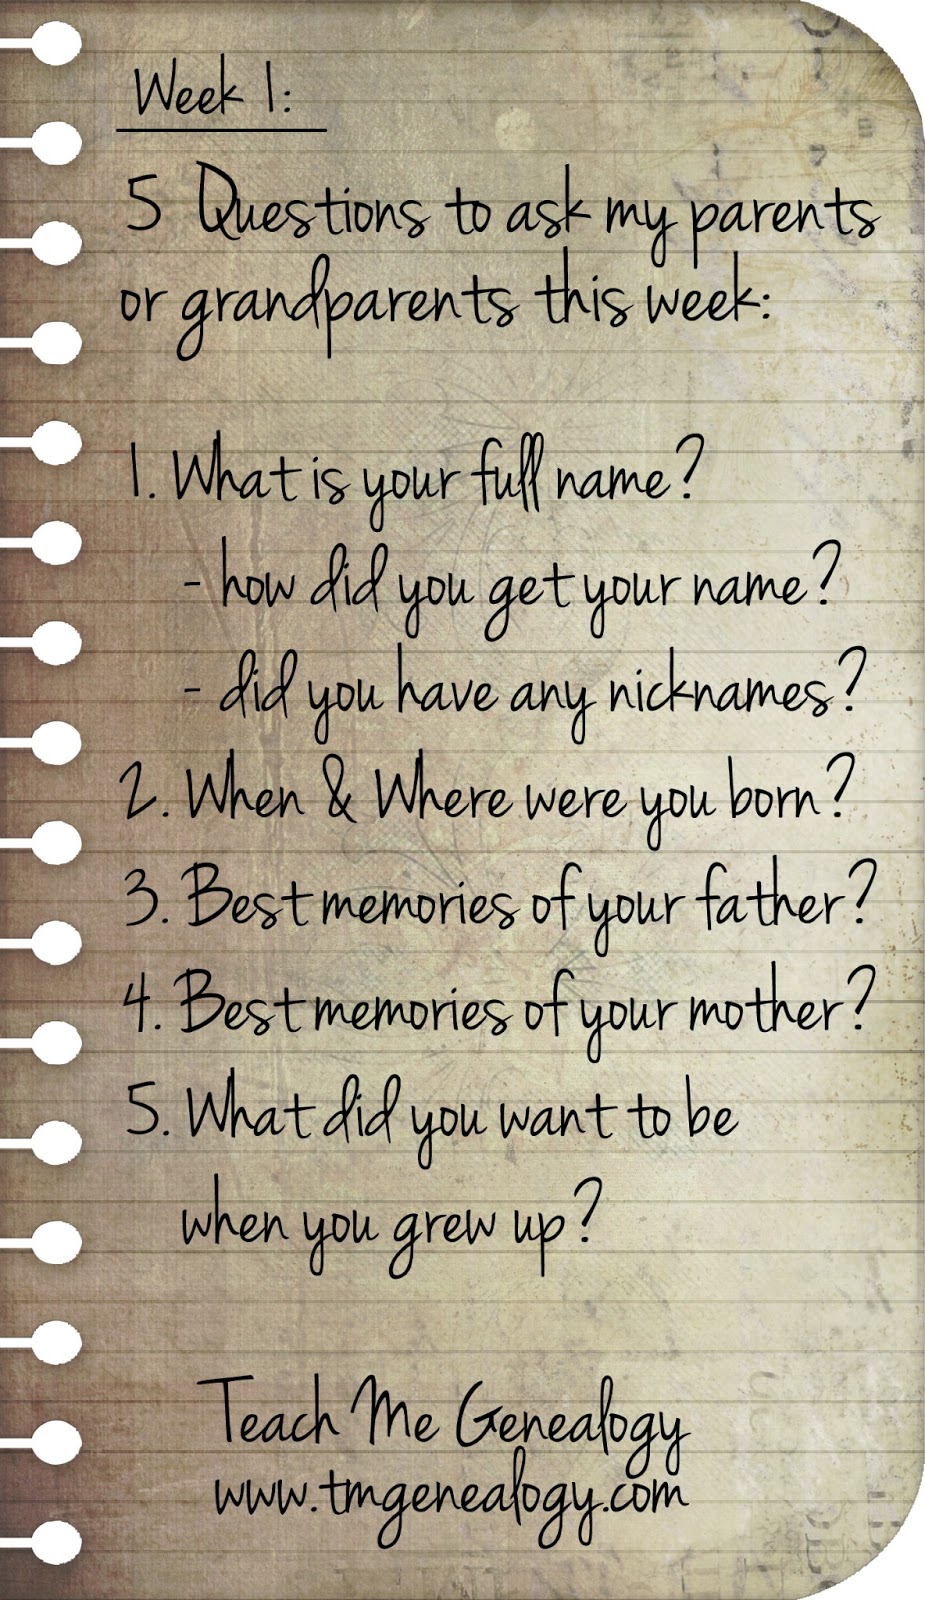 5 Questions To Ask Your Parents or Grandparents This Week. Week 1